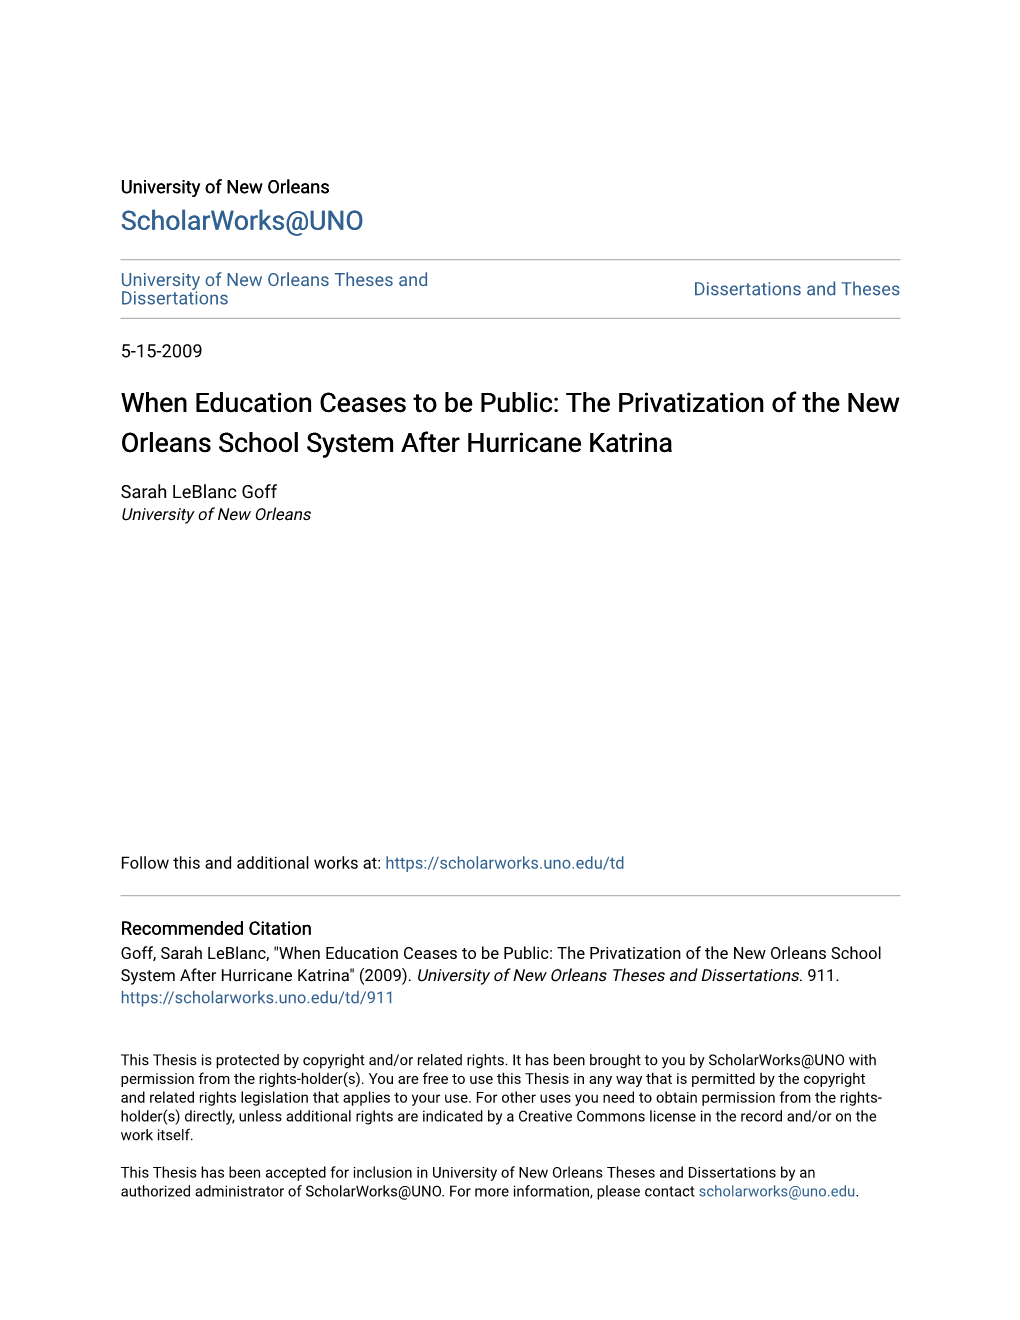 When Education Ceases to Be Public: the Privatization of the New Orleans School System After Hurricane Katrina